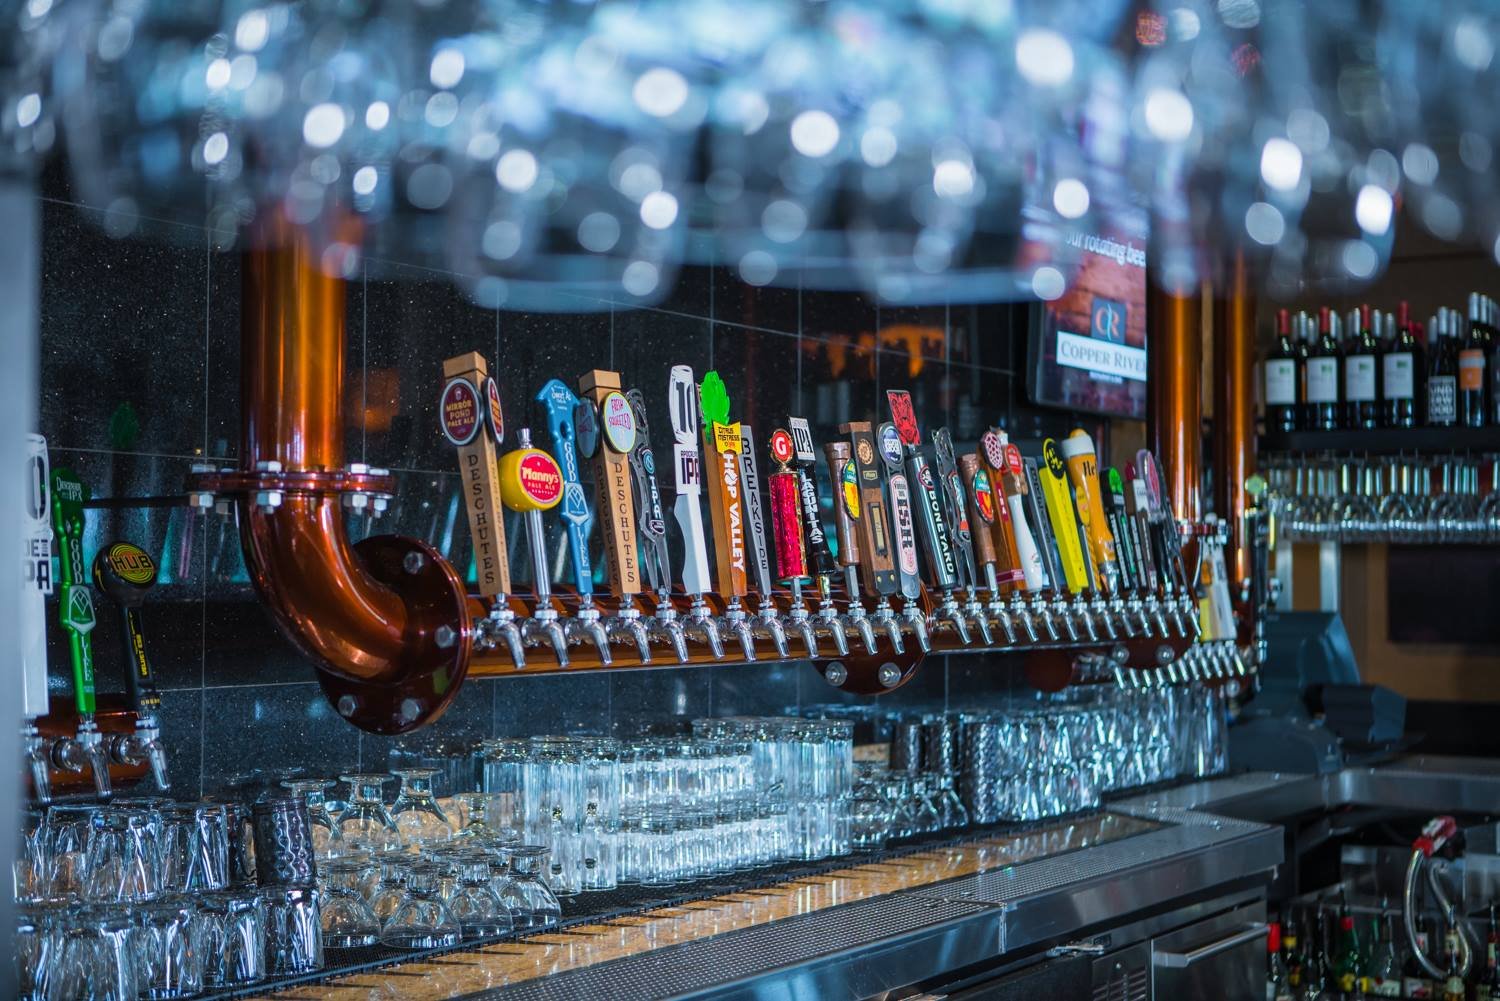 52 CRAFT BEERS ON TAP